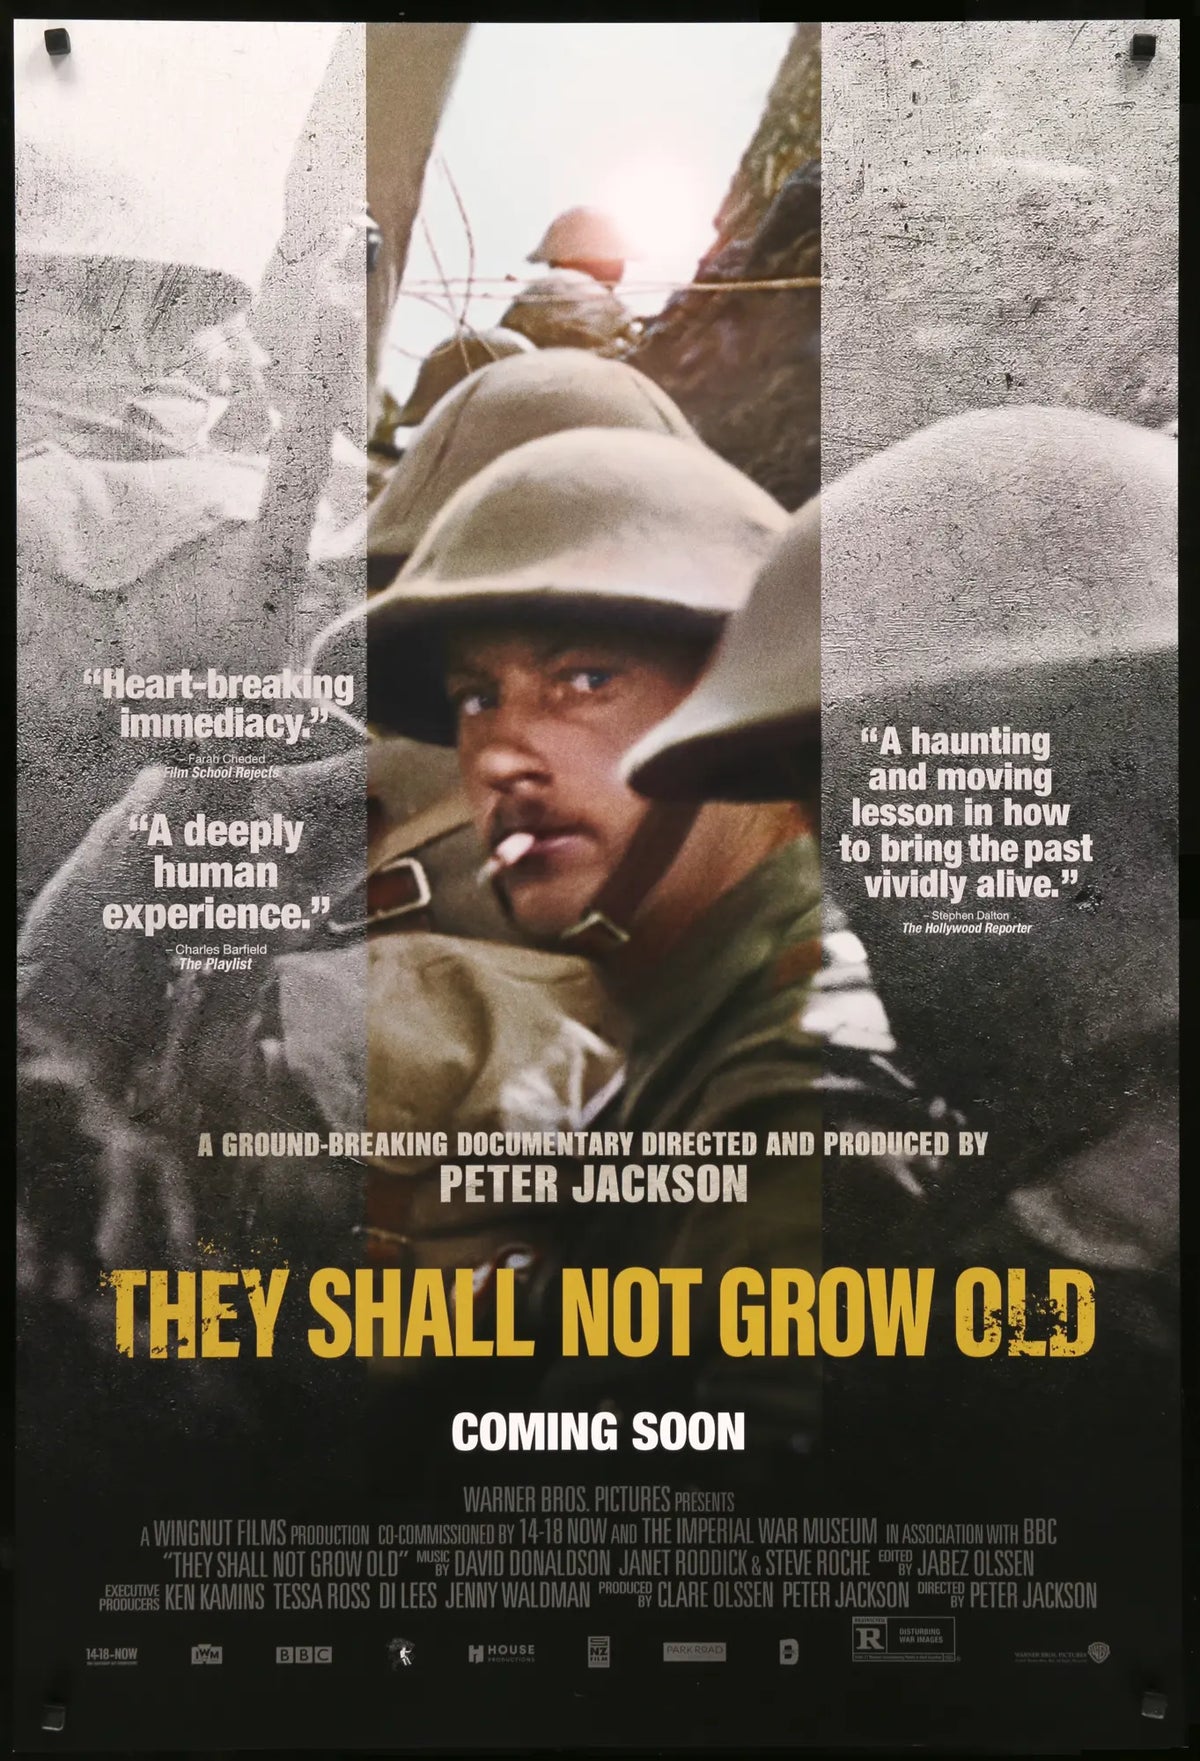 They Shall Not Grow Old (2018) original movie poster for sale at Original Film Art